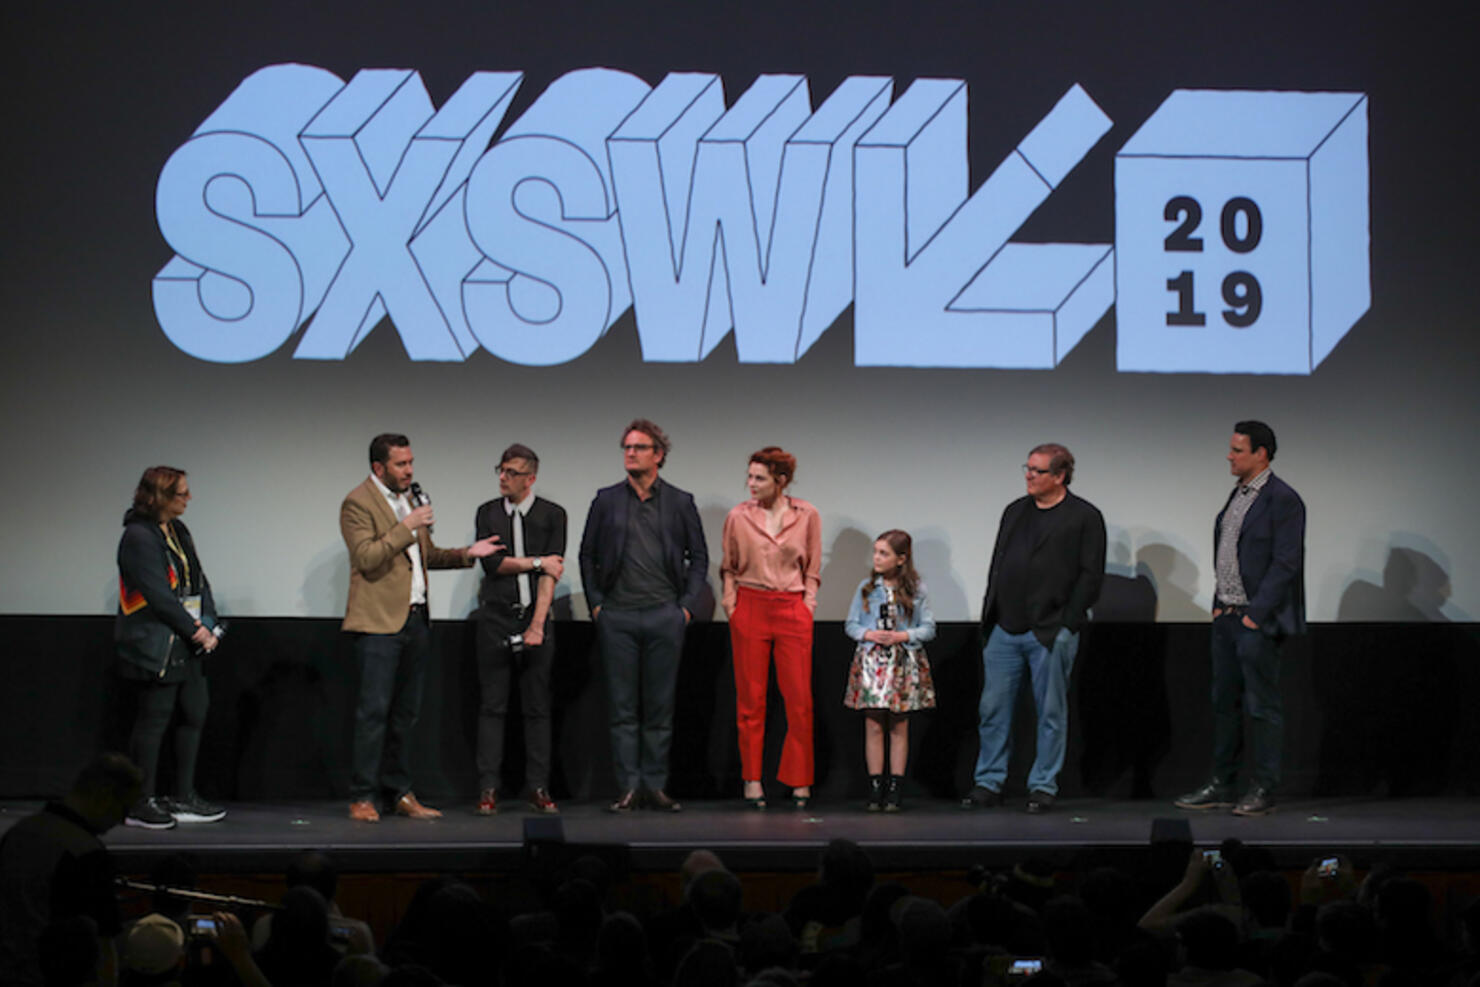 WORLD PREMIERE AND CLOSING NIGHT SCREENING OF 'PET SEMATARY' AT THE 2019 SXSW¬Æ FILM FESTIVAL